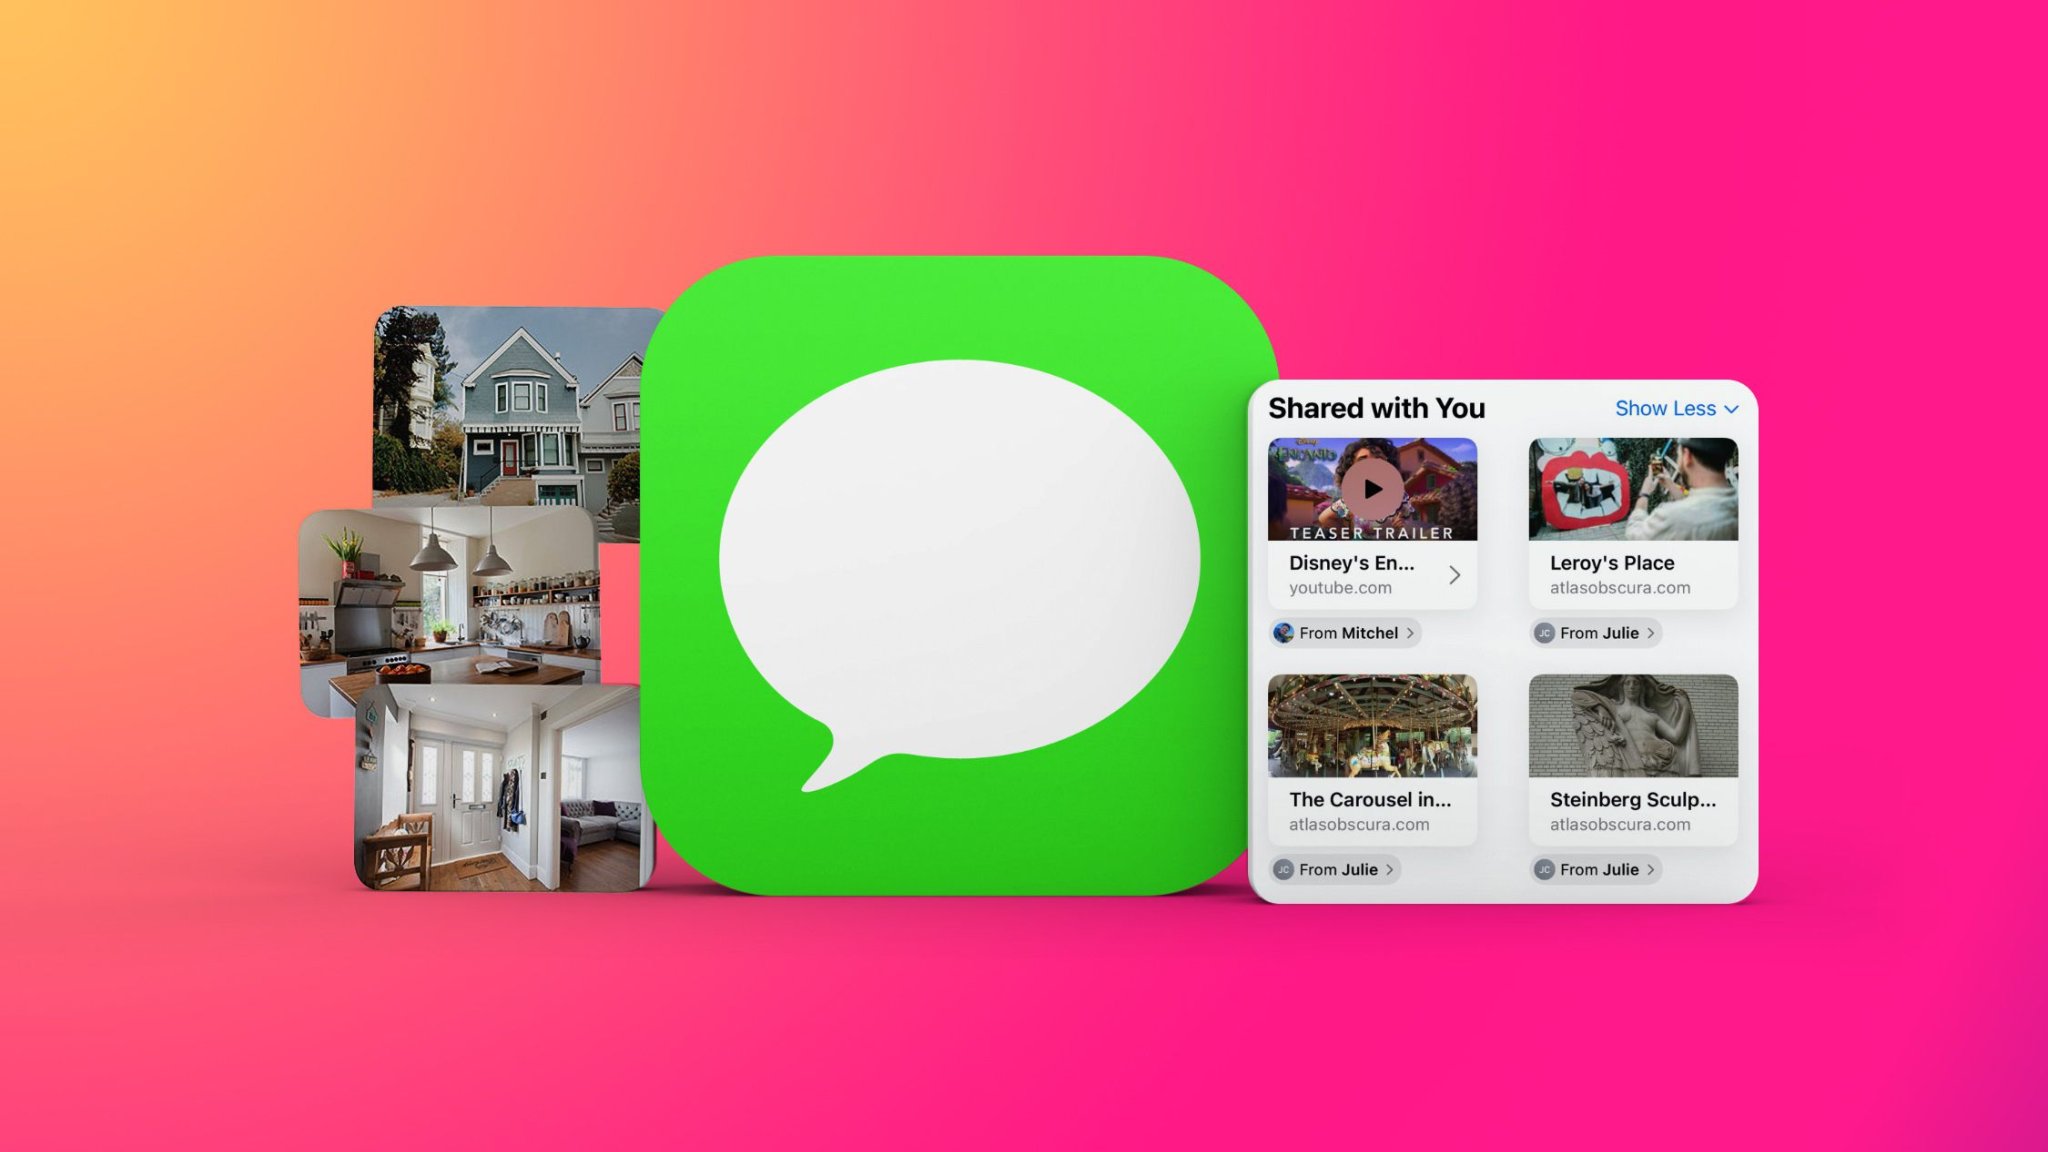 iOS 15 Messages Guide: New Features, Photos, Updates